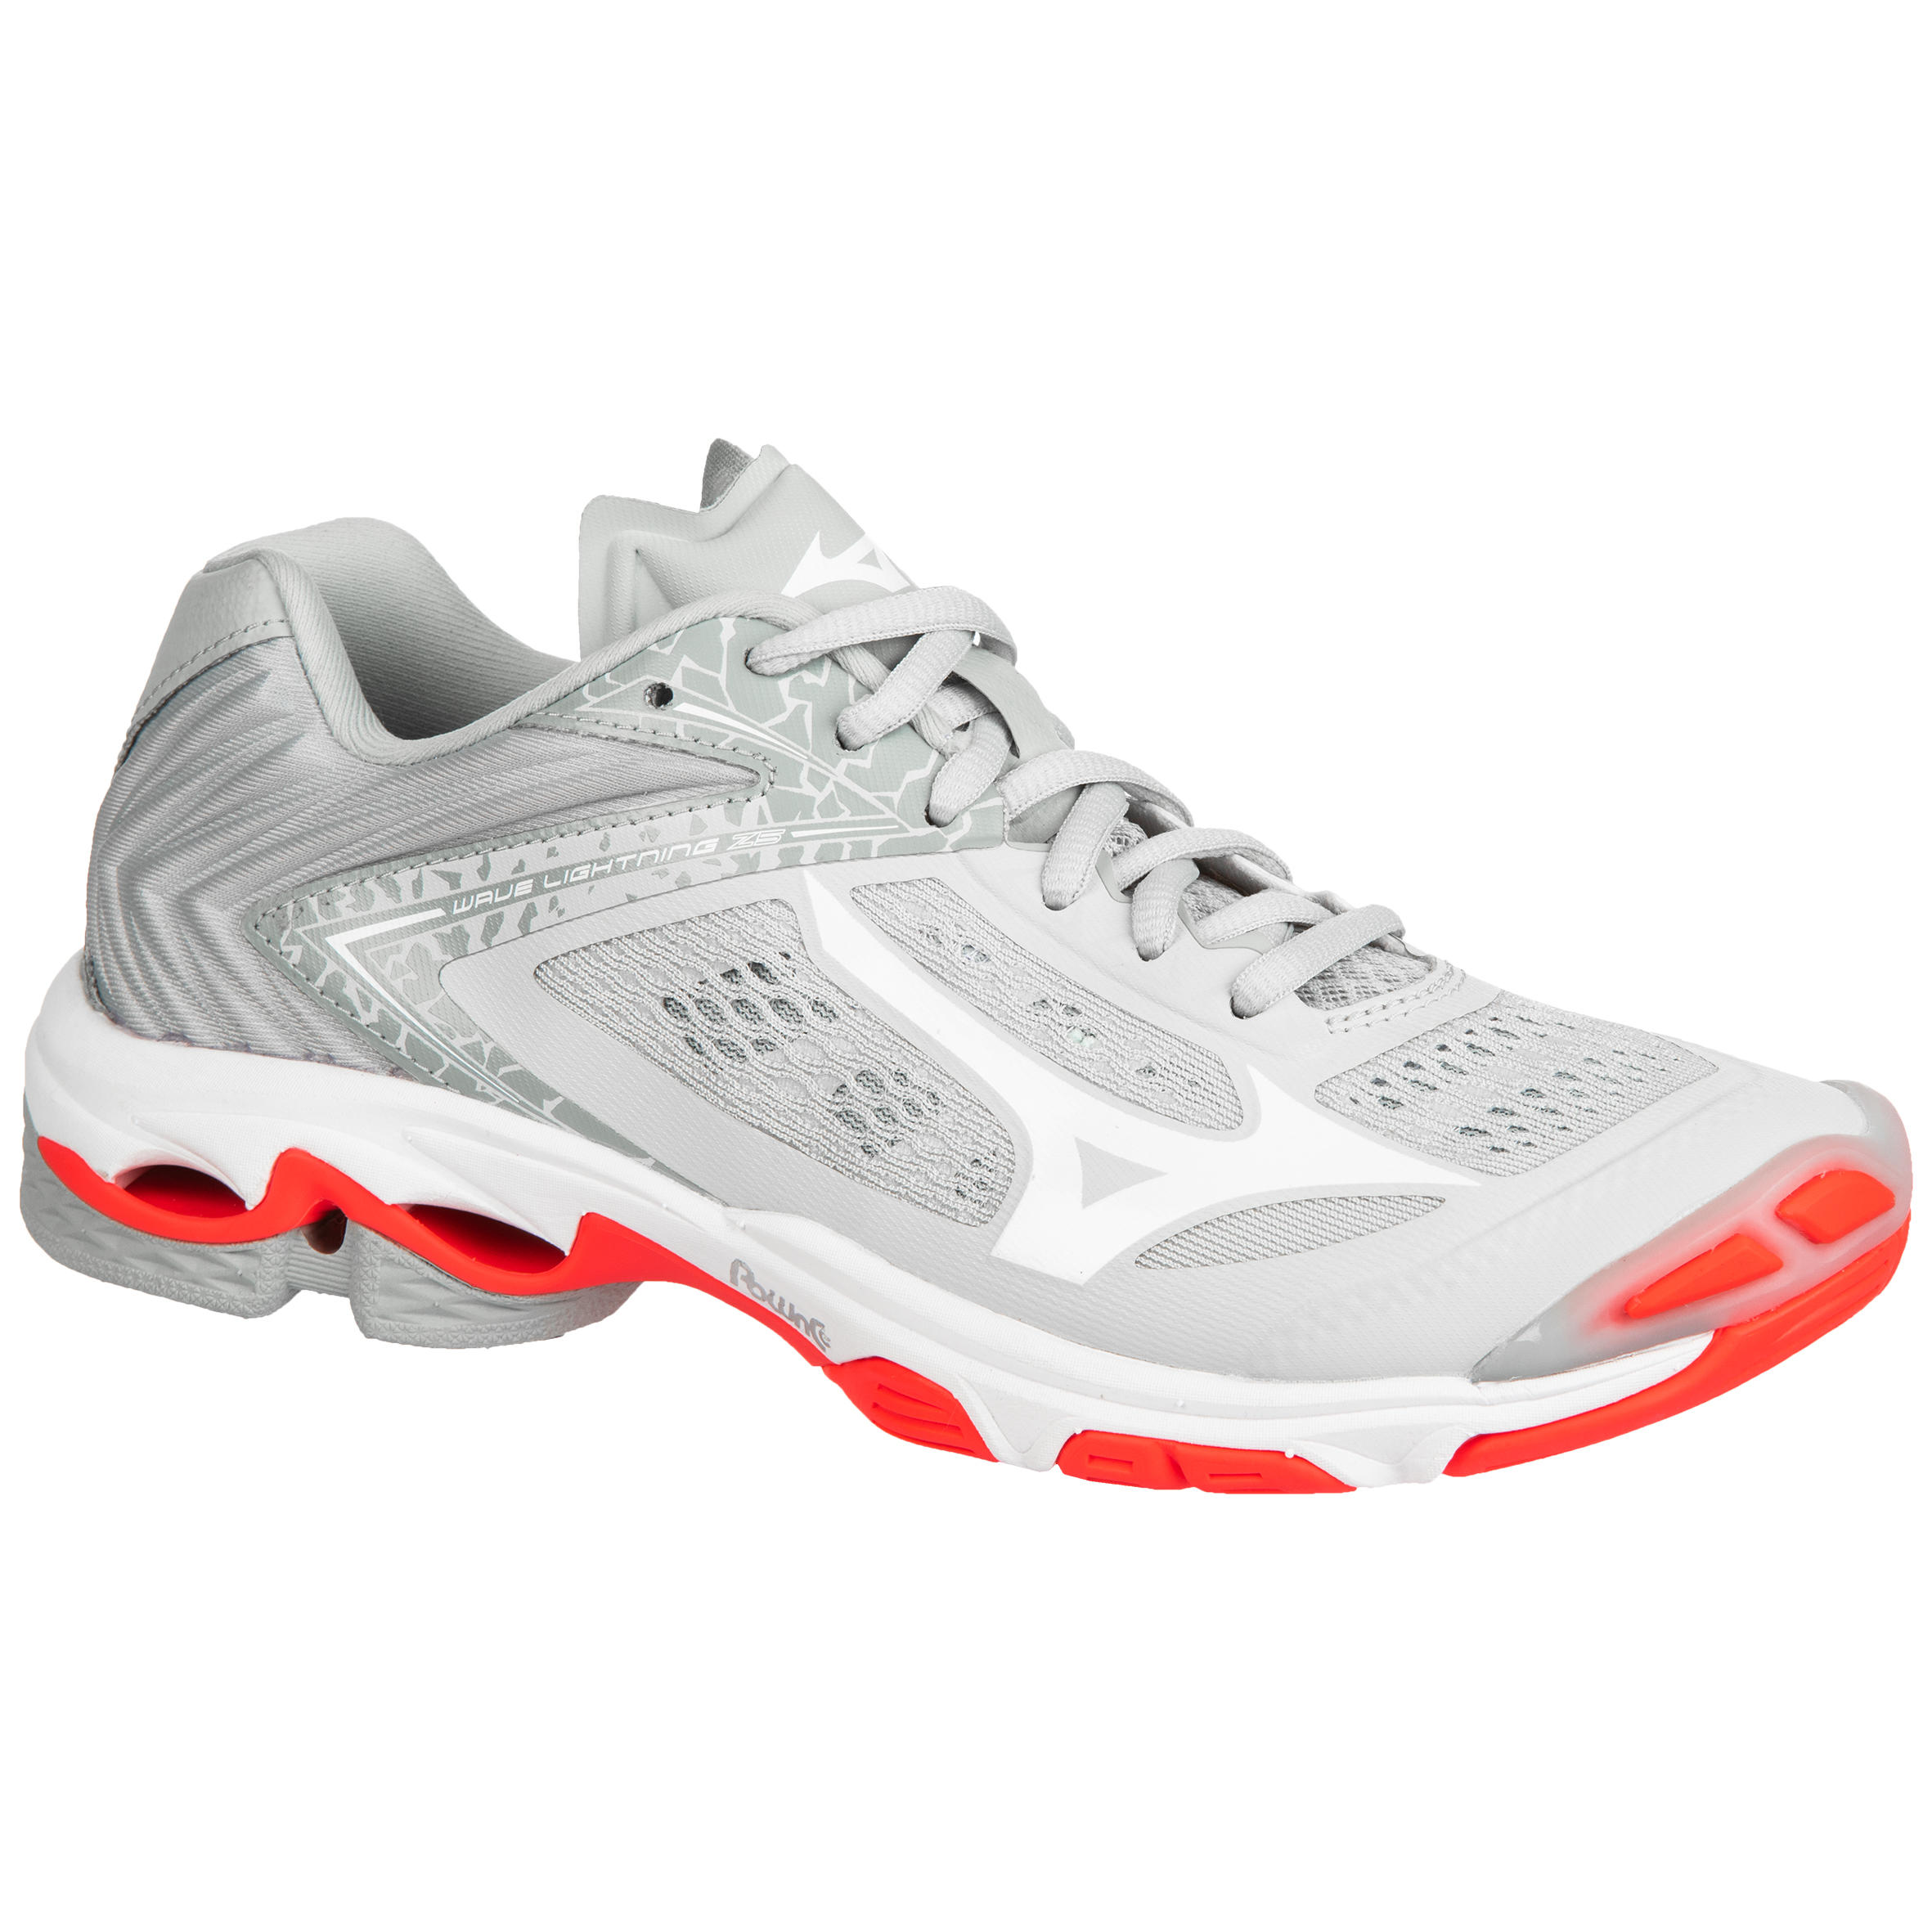 Wave Lightning Women's Volleyball Shoes - Coral/White MIZUNO - Decathlon